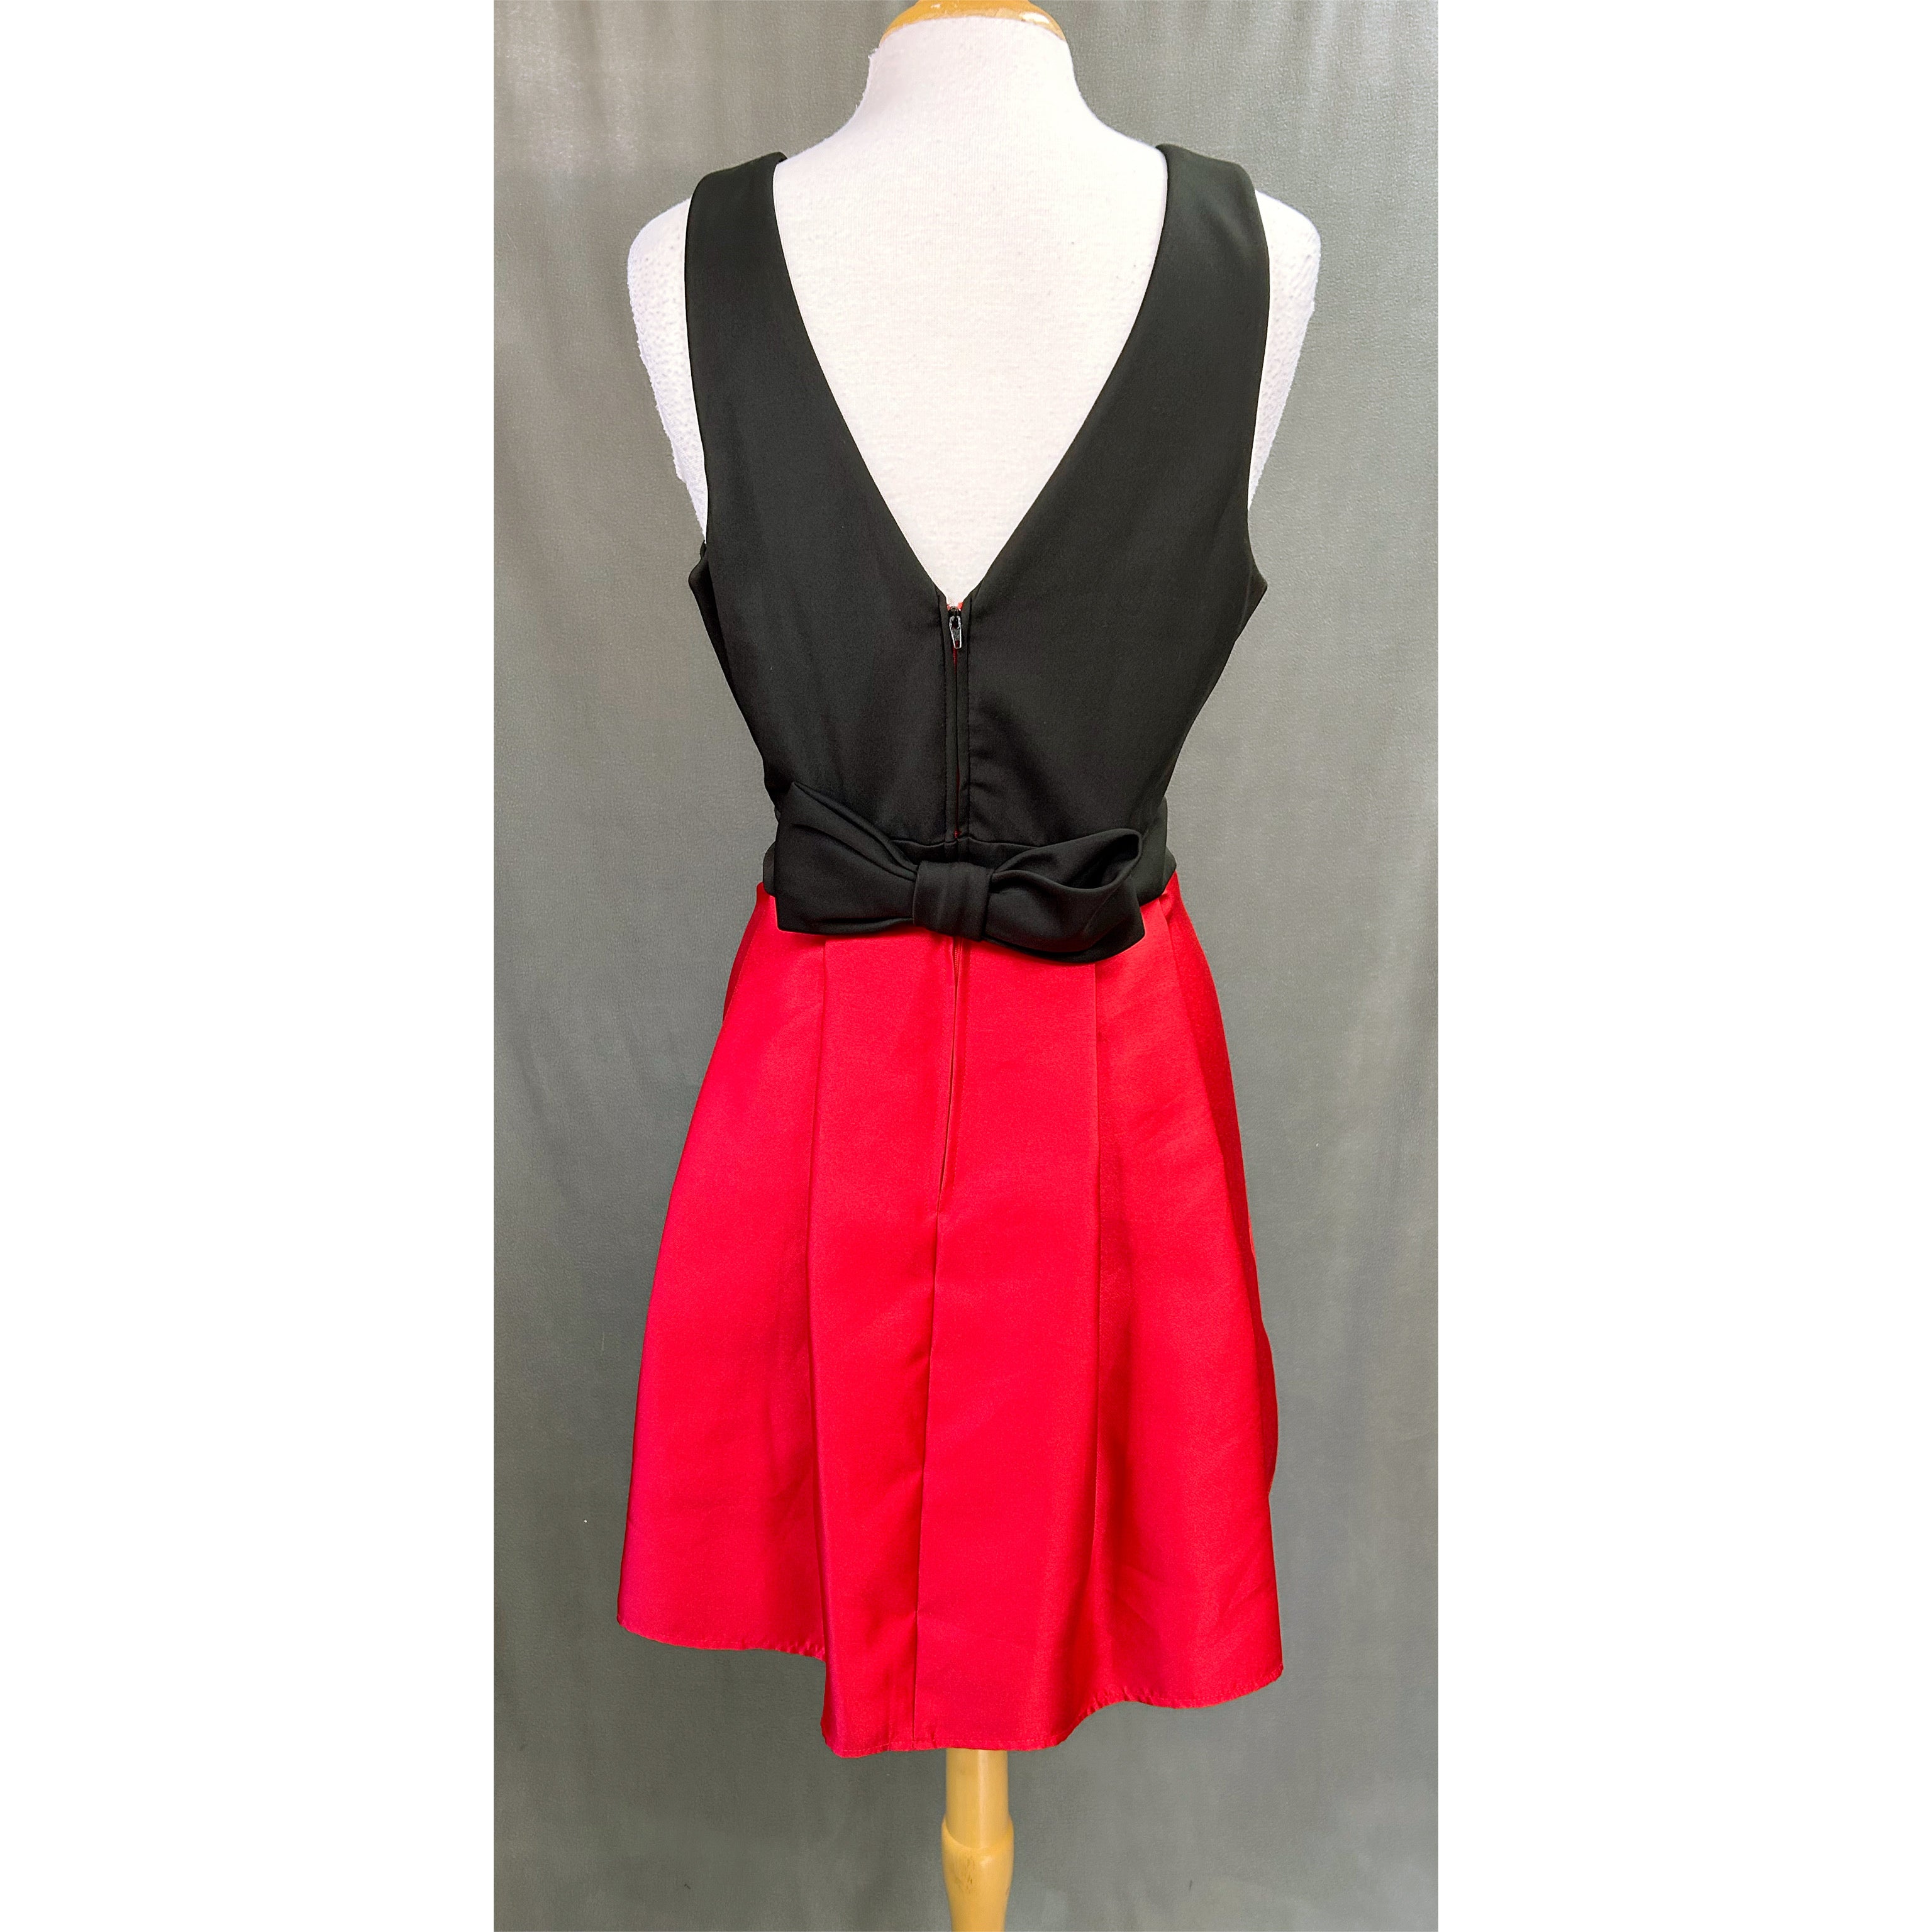 Teeze Me red and black dress, size 15/16